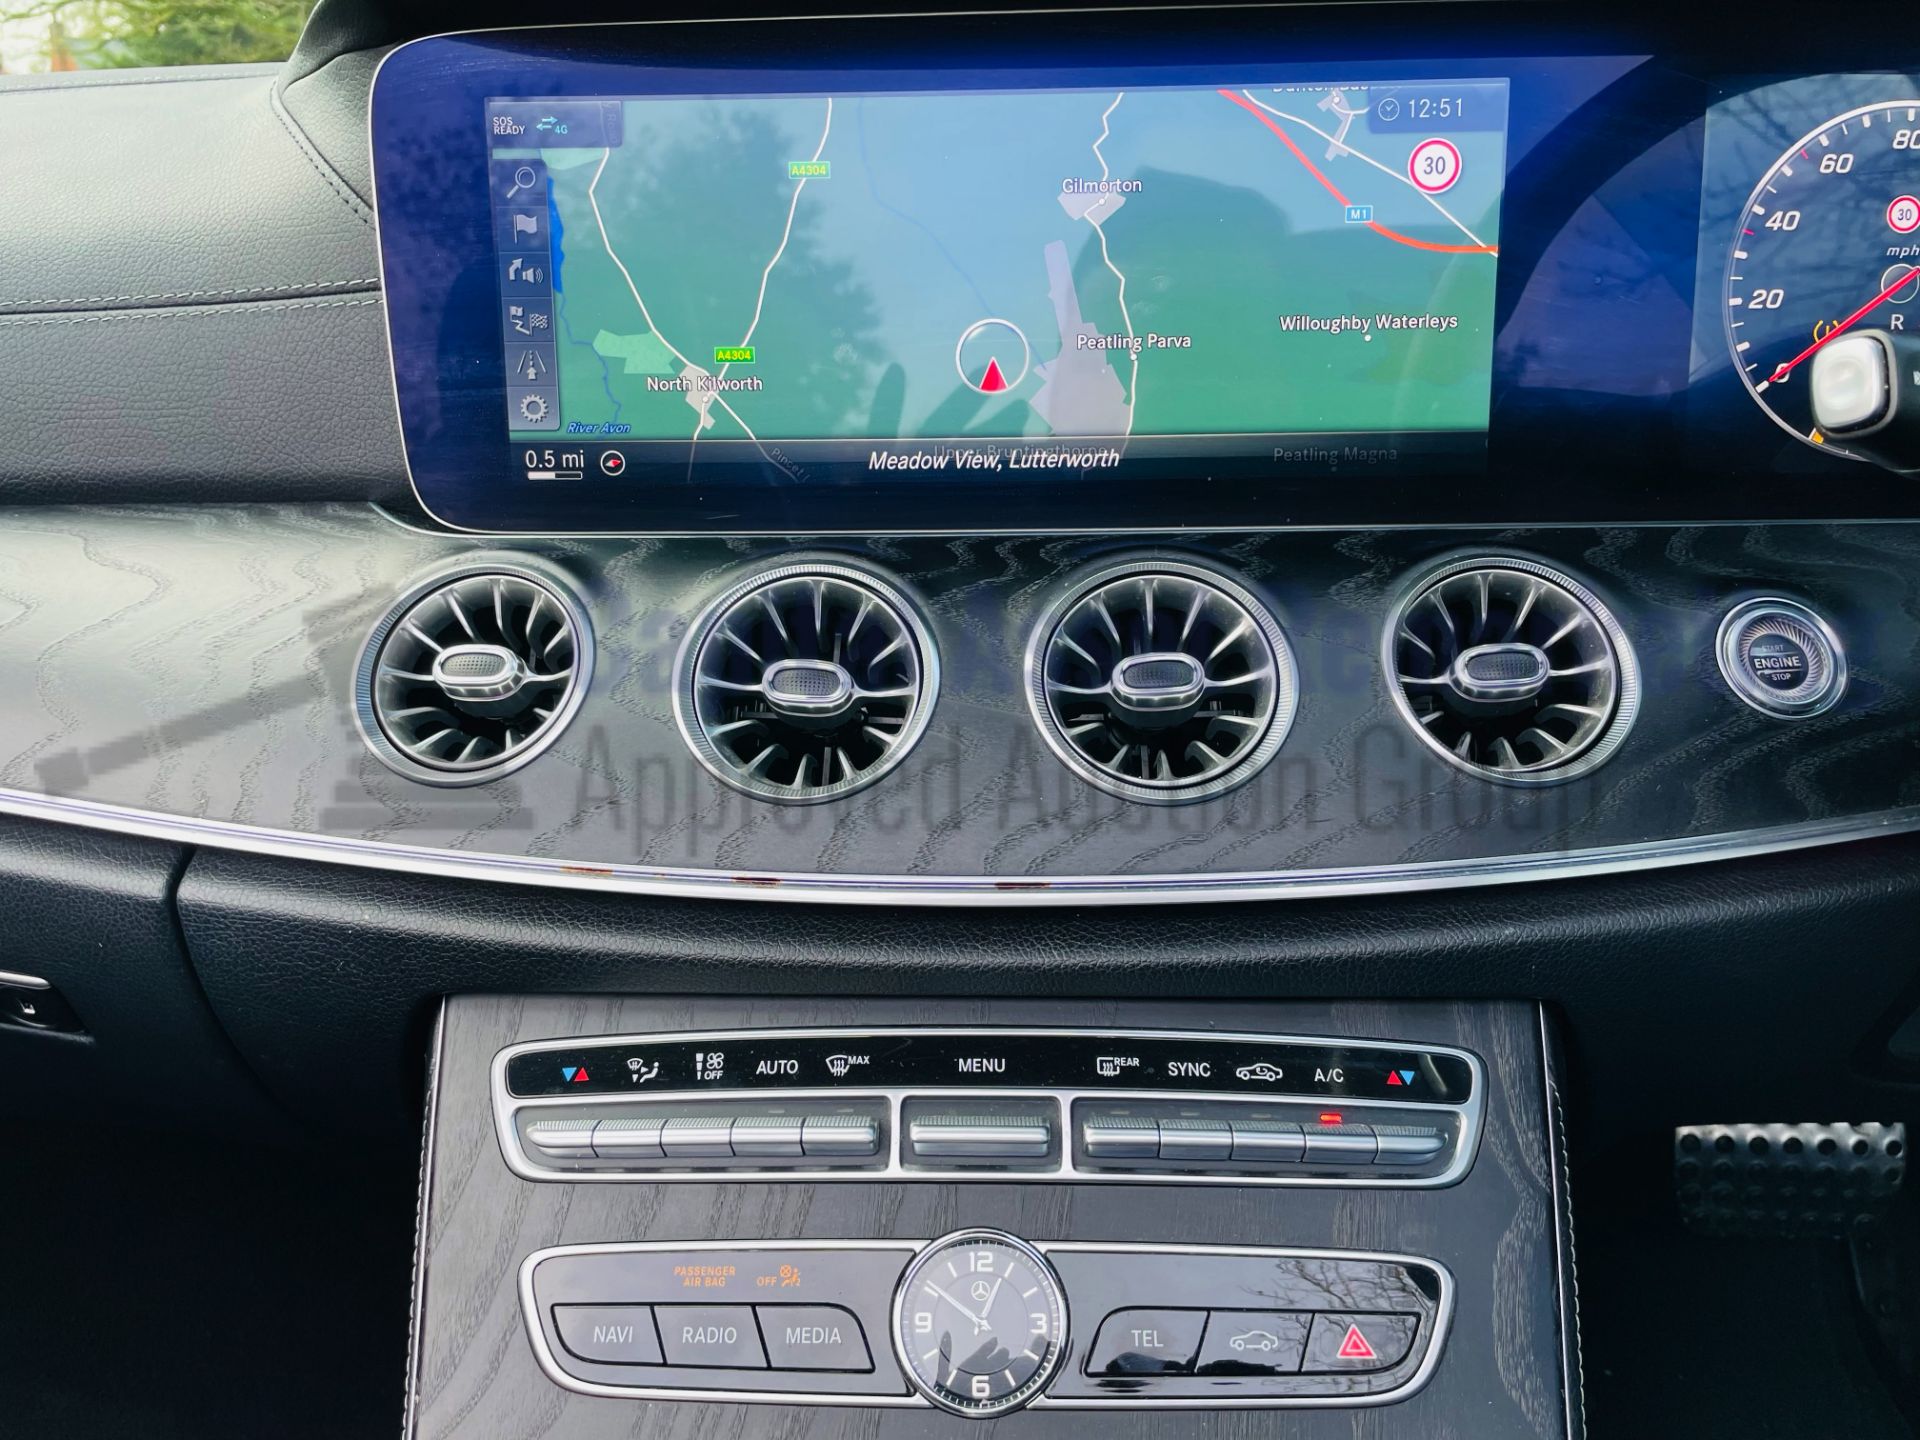 MERCEDES-BENZ E220D *AMG LINE - CABRIOLET* (2019 - EURO 6) '9G TRONIC AUTO - SAT NAV' *FULLY LOADED* - Image 58 of 66